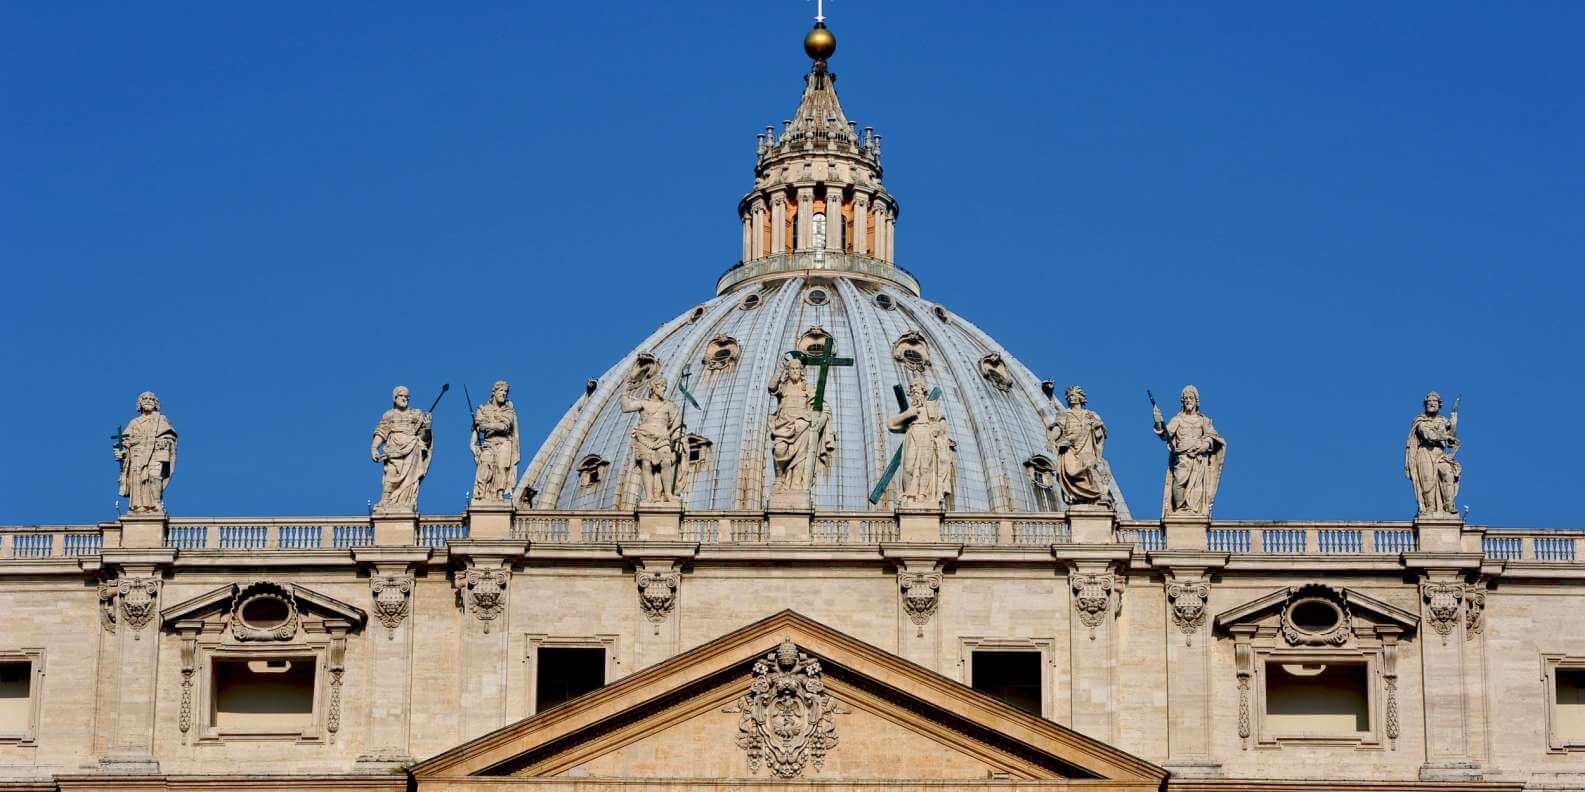 Marvel at St. Peter's Basilica